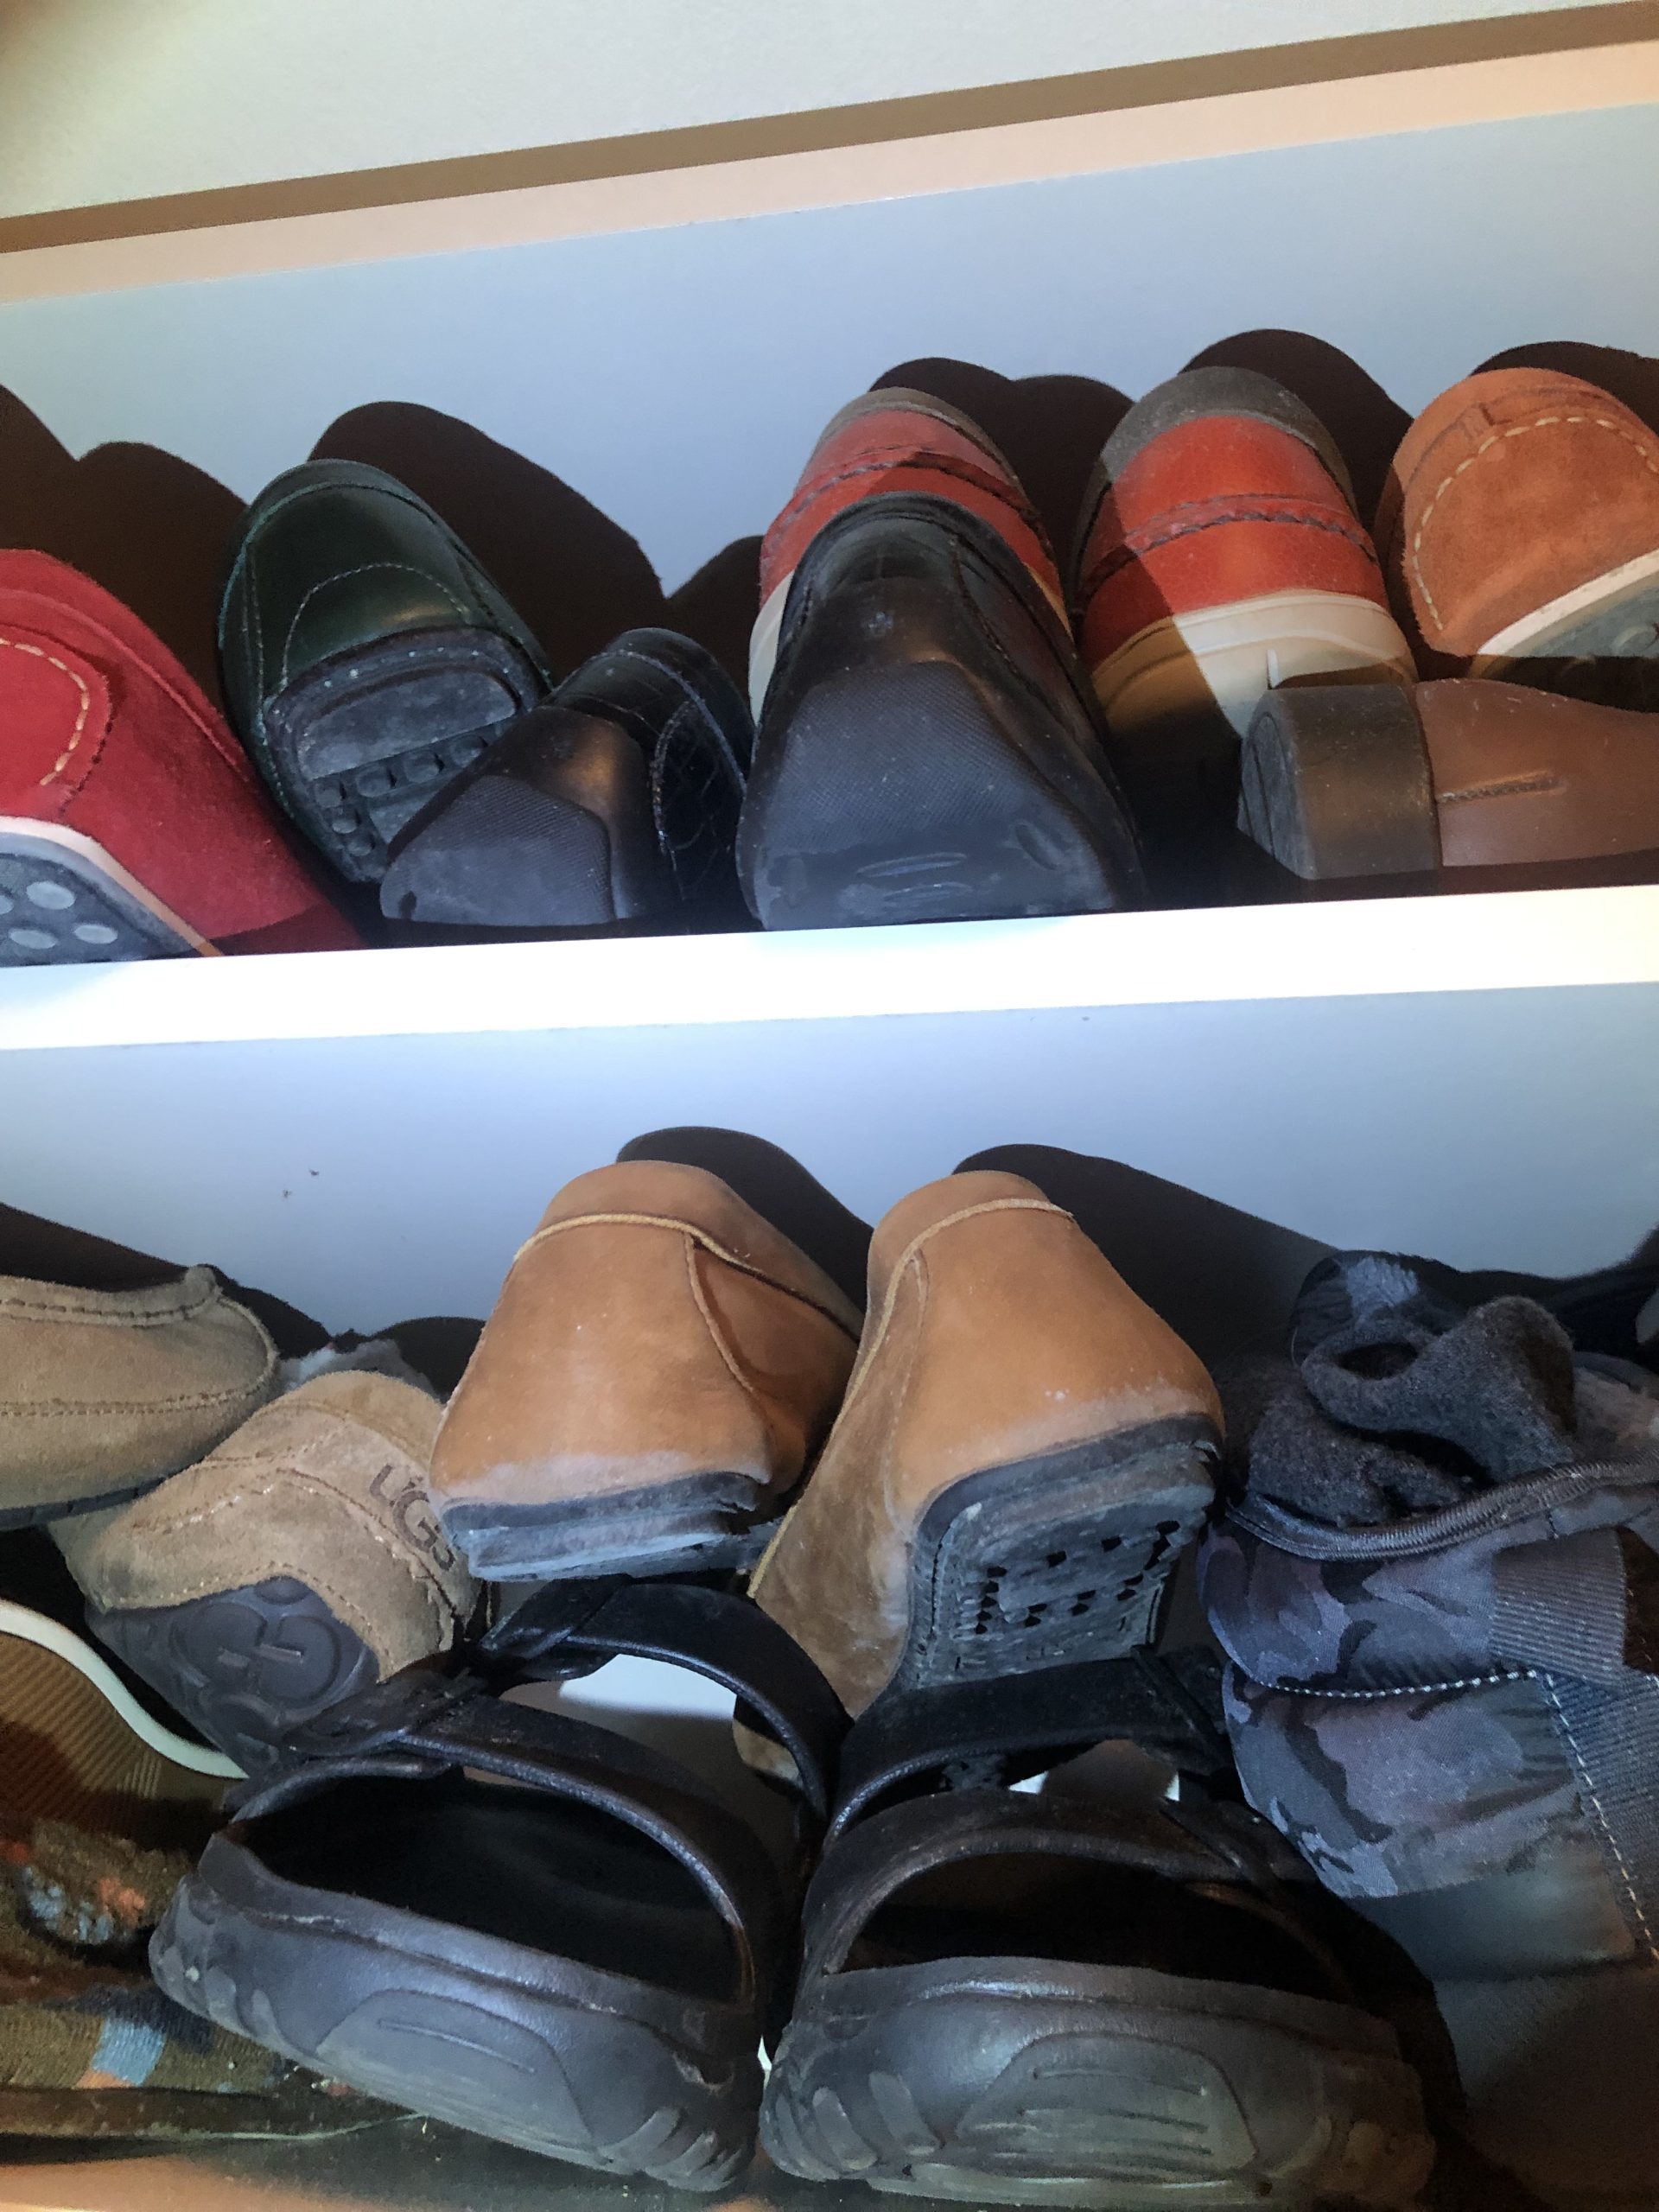 Mold on shoes and clothes in closet.